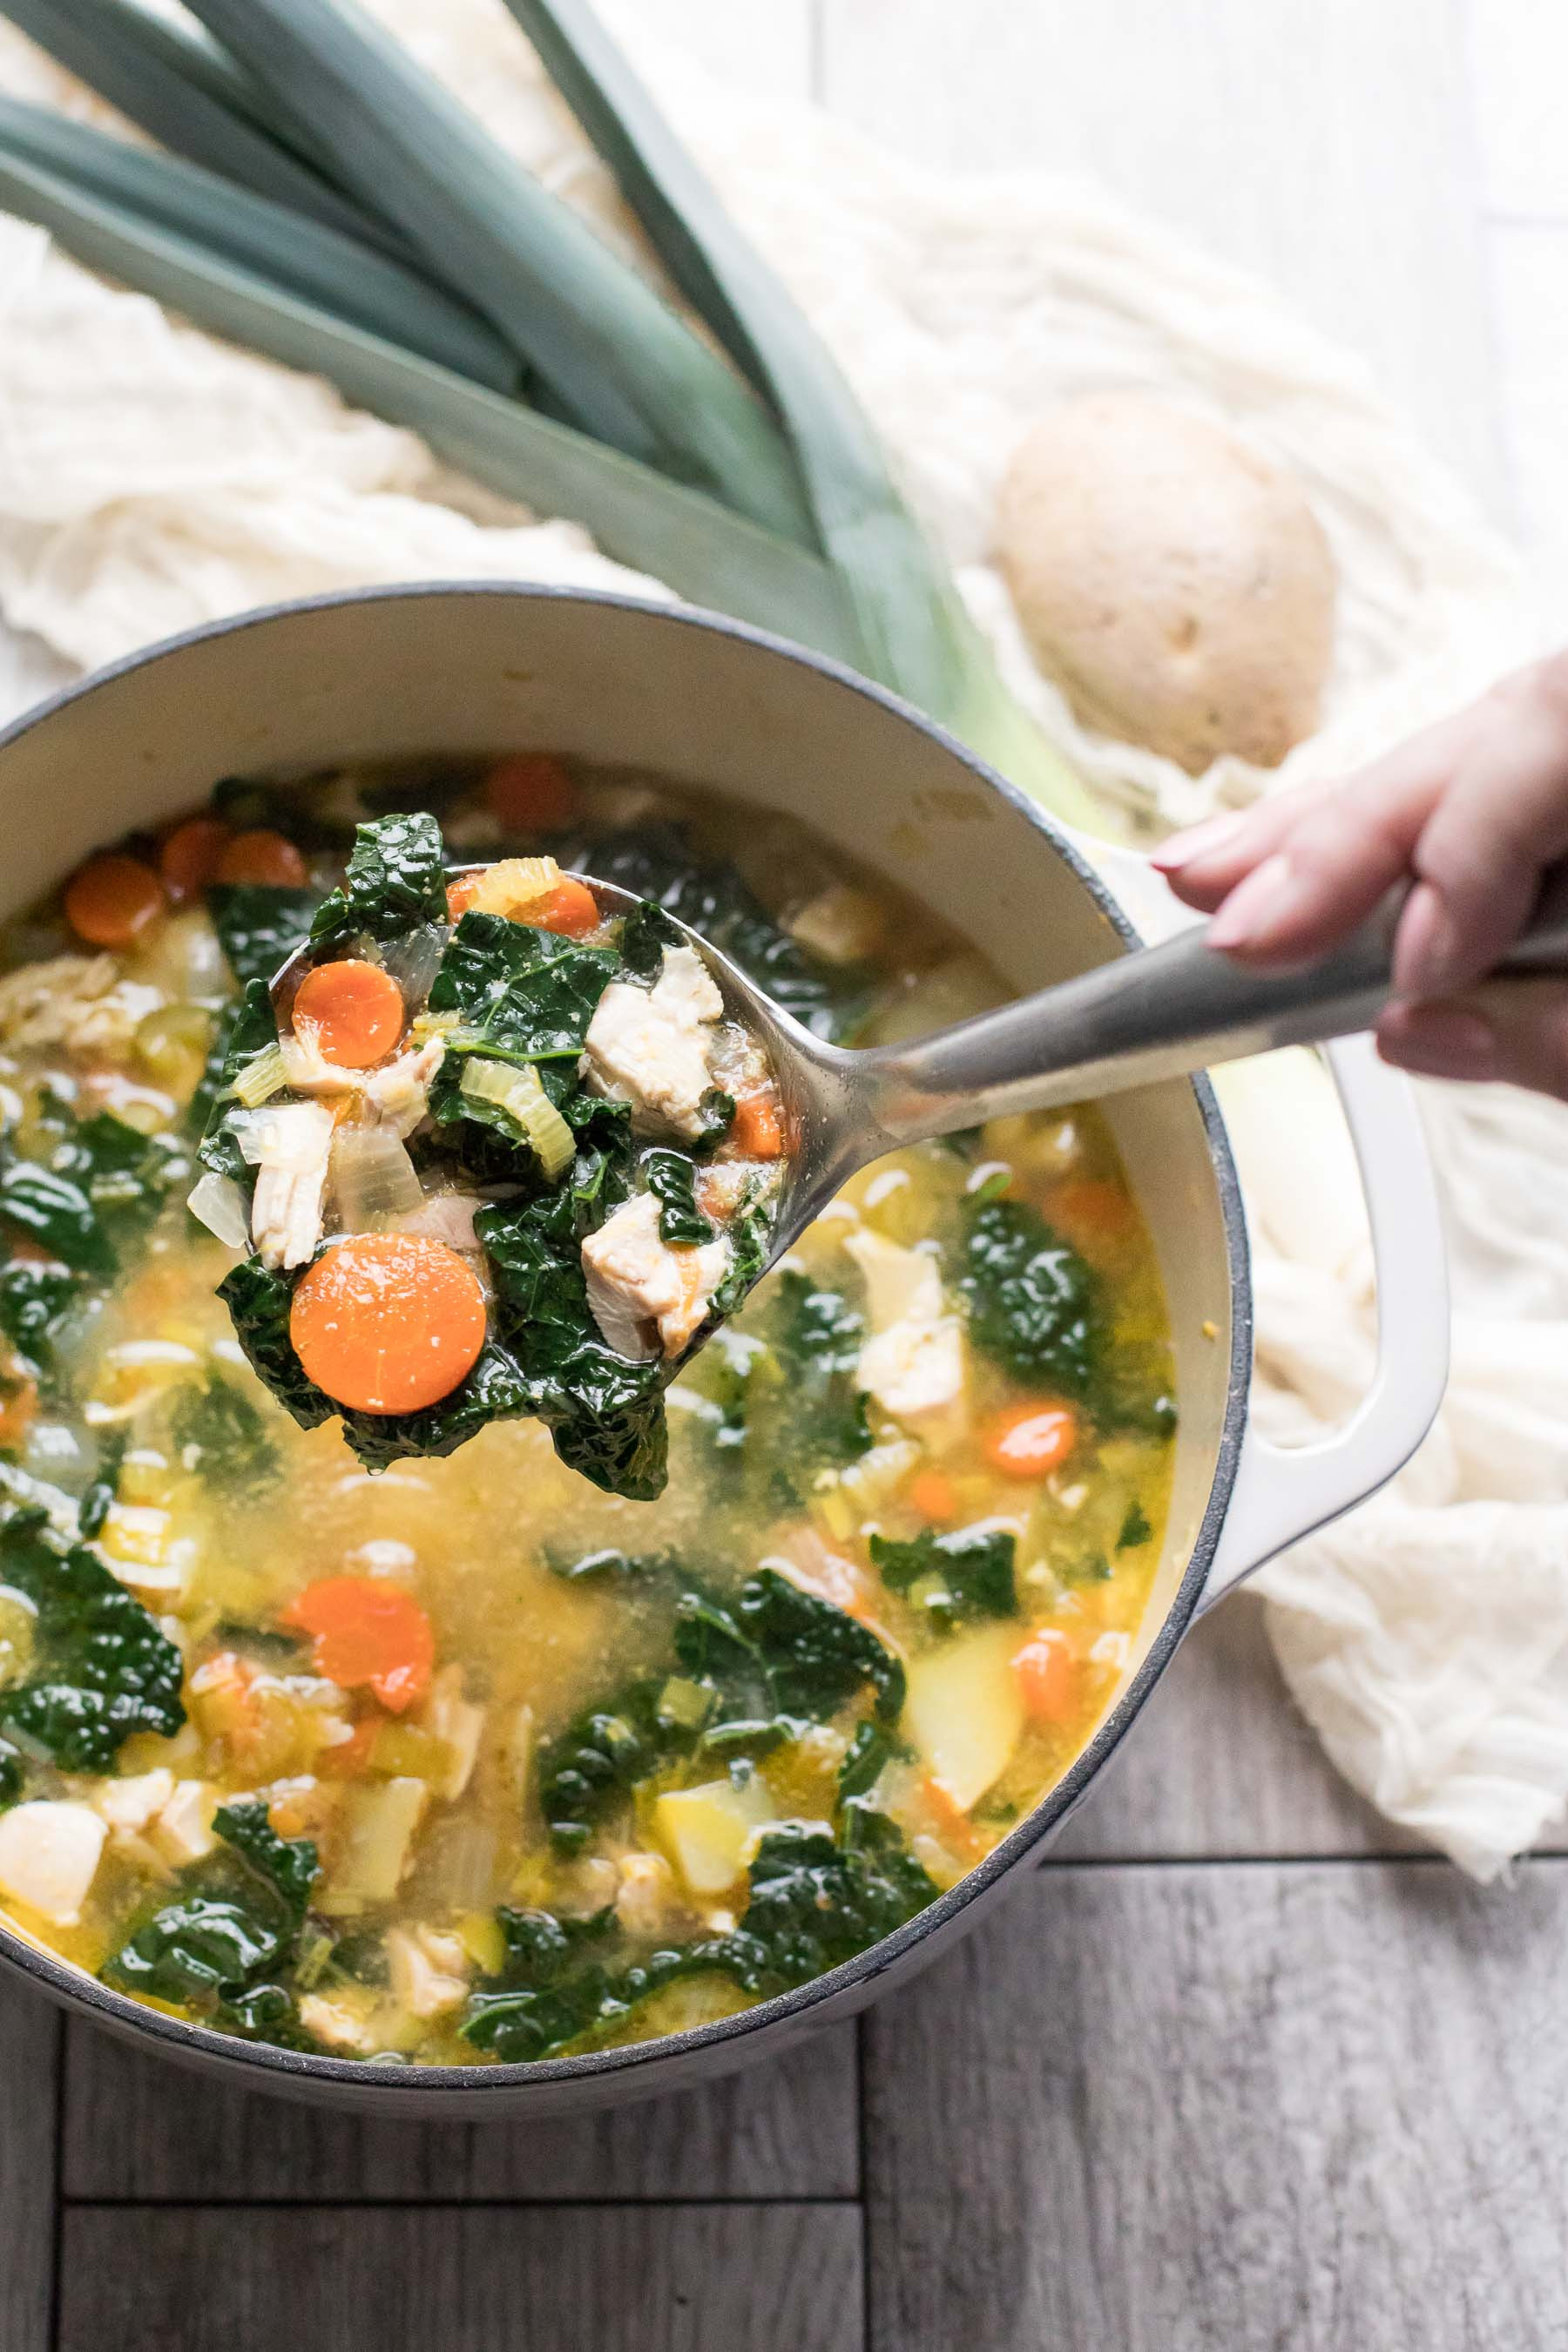 Healthy Chicken And Kale Recipes
 Paleo & Whole30 Potato Leek & Chicken Soup with Kale